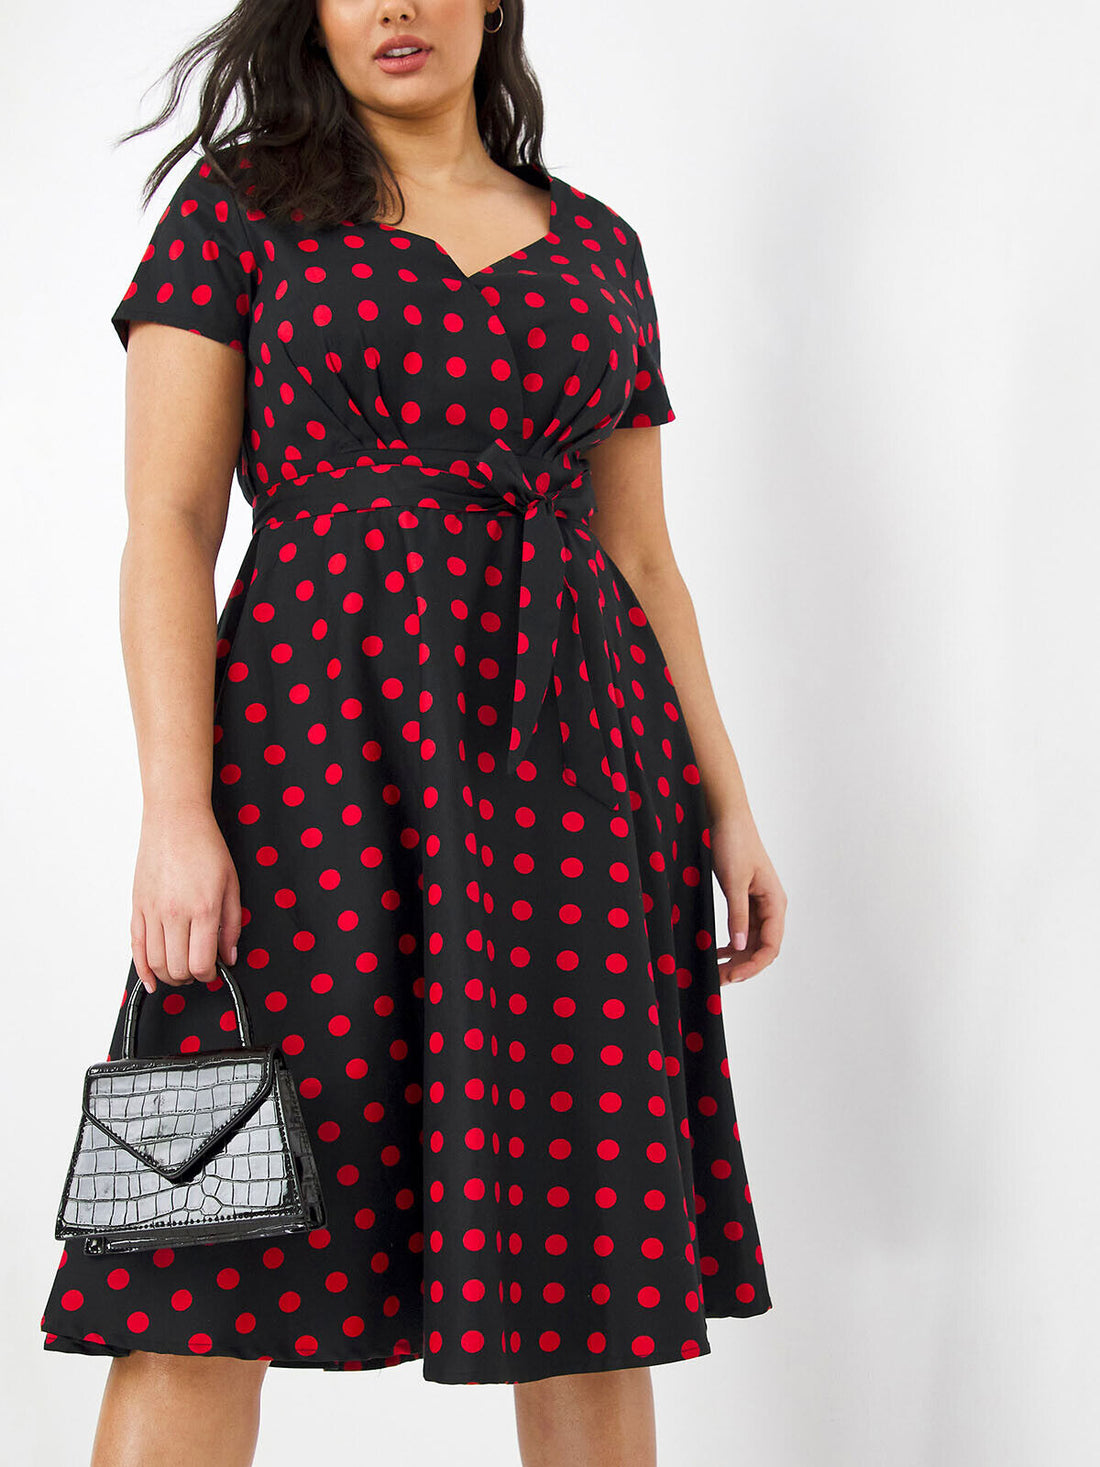 Joe Browns Red Sassy Spot Dress in Sizes 12 16 18 20 22 24 26 28 32 RRP £64